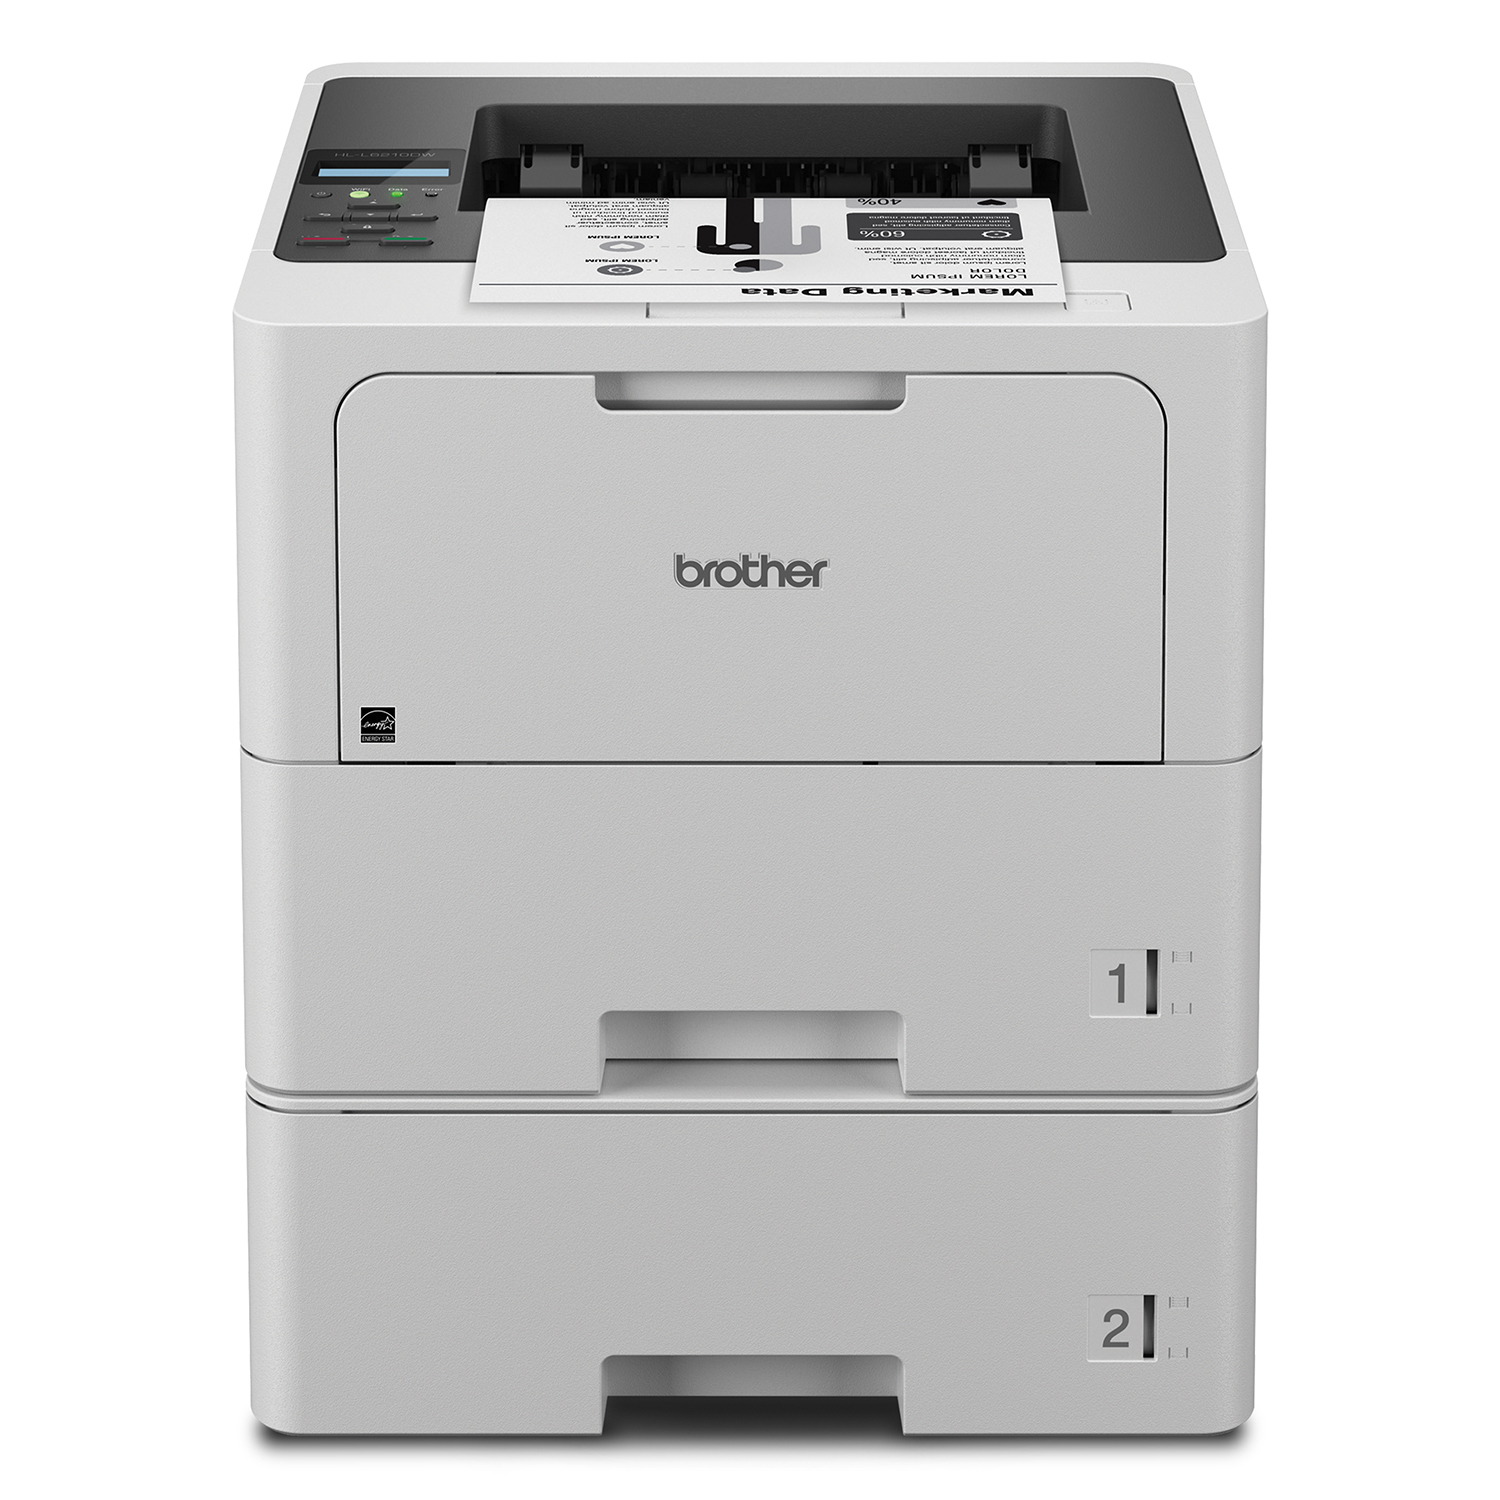 

Brother Business Monochrome Laser Printer with Dual Paper Trays, Wireless Networking, and Duplex Printing